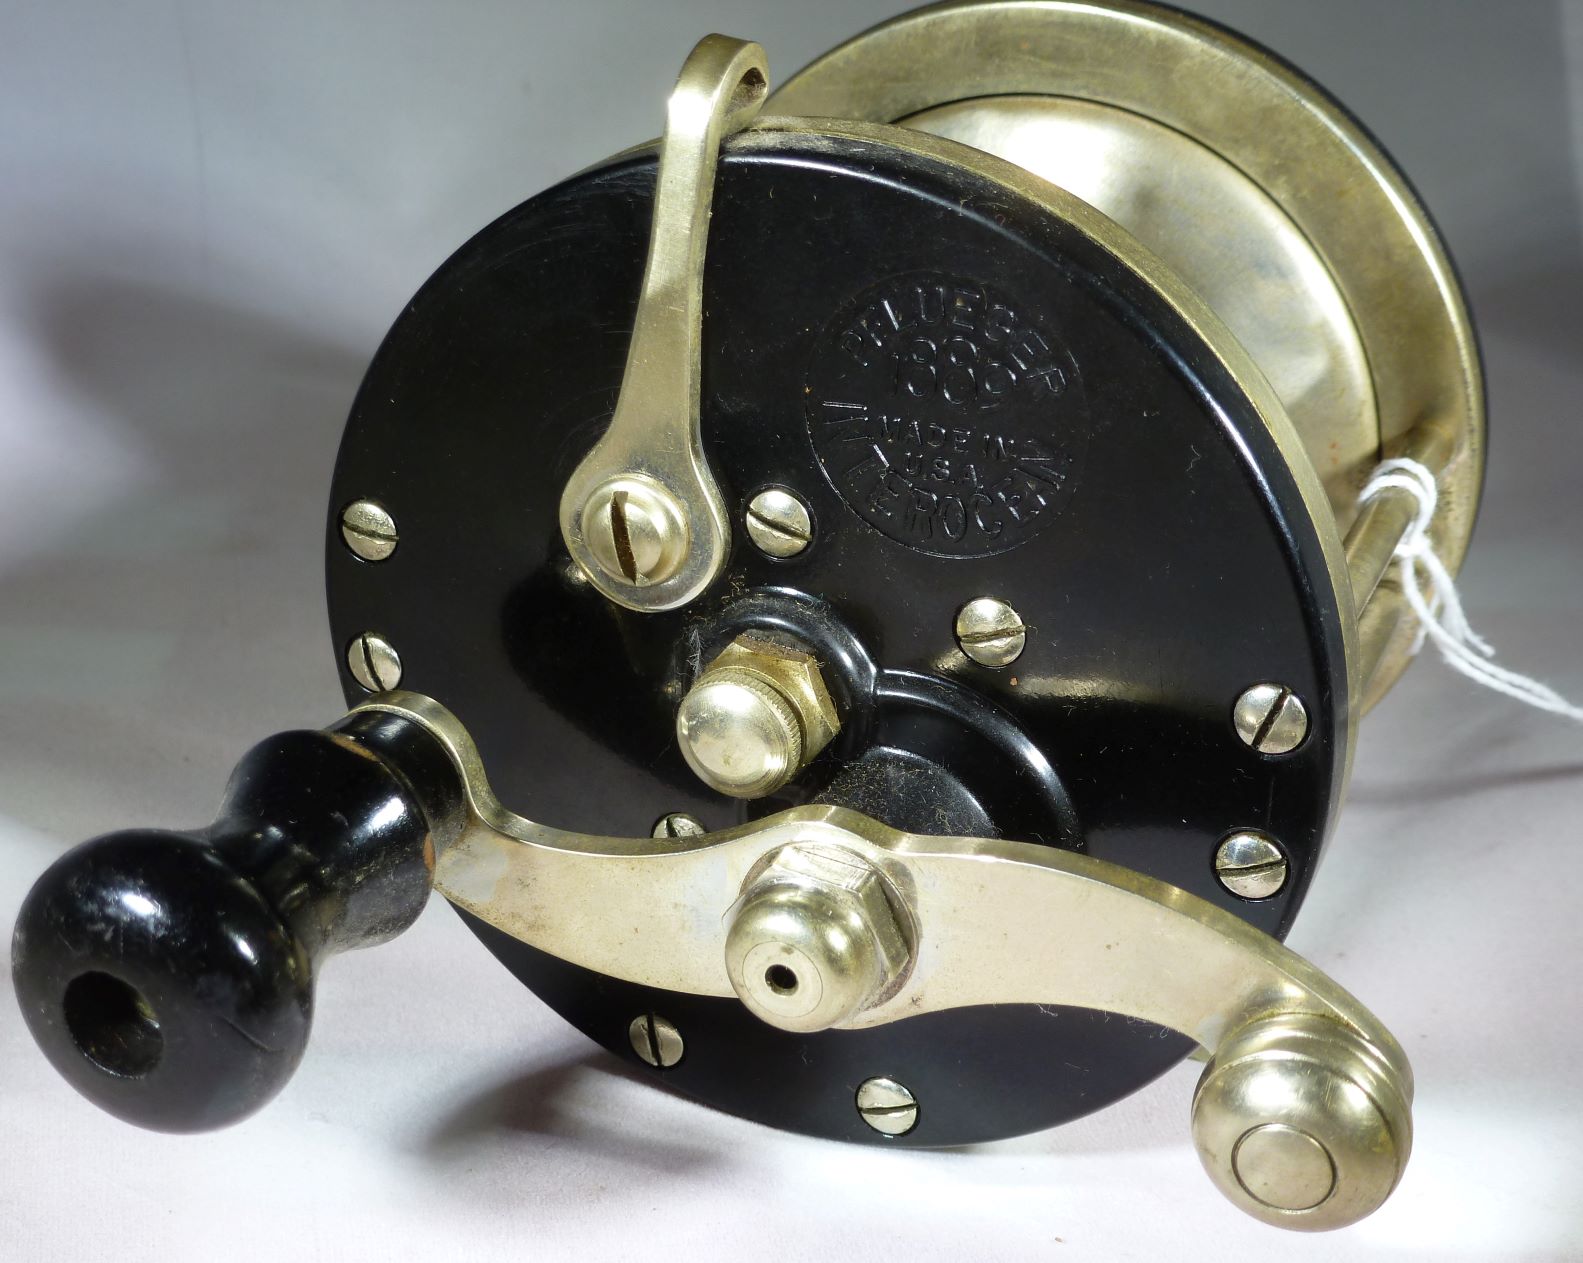 ORCA Selling Good Reels at Good Prices - Reel Talk - ORCA